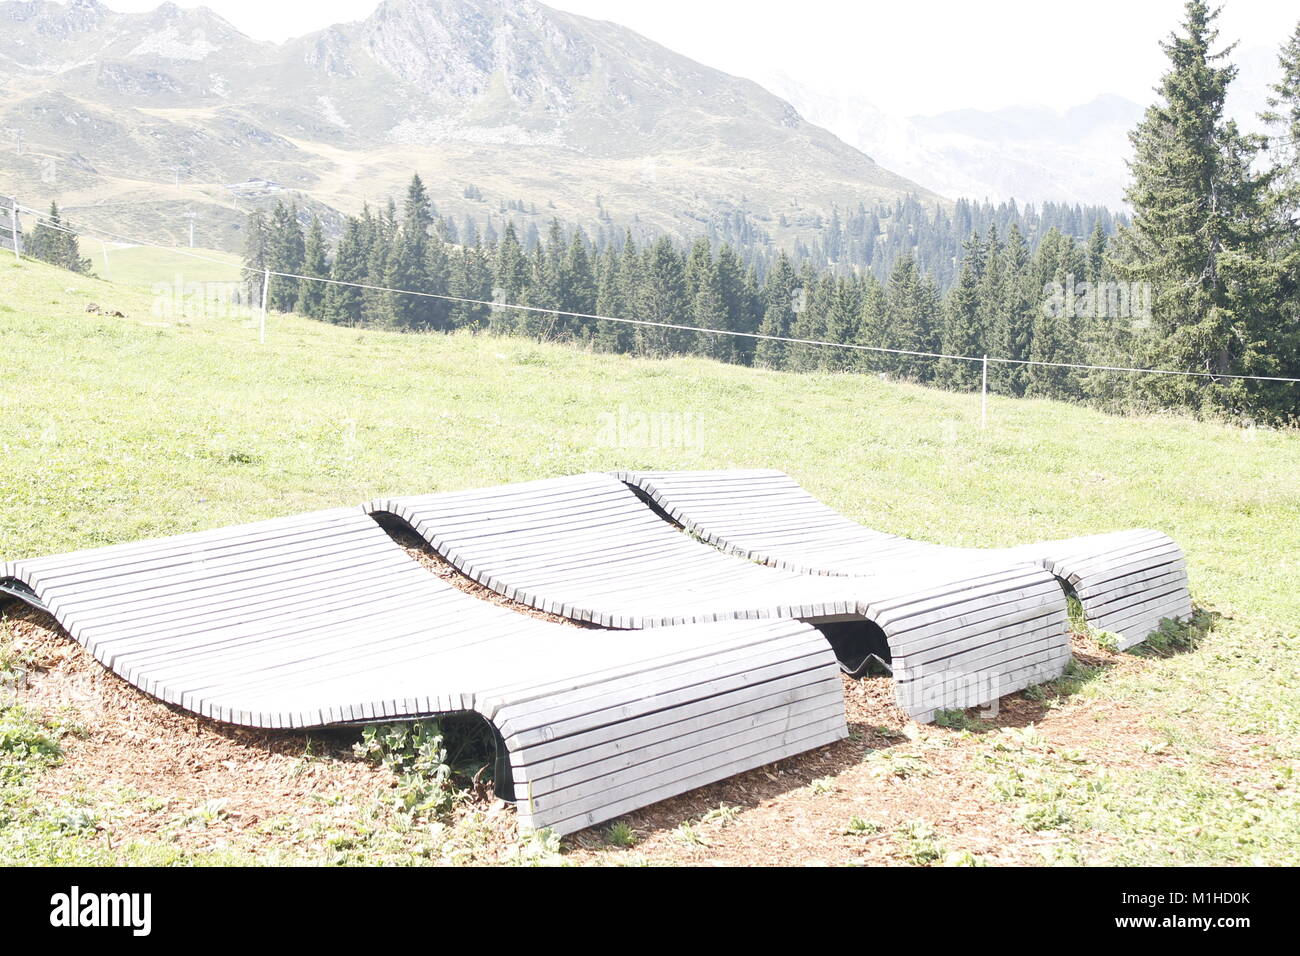 wooden deckchair to relax in the mountains Stock Photo